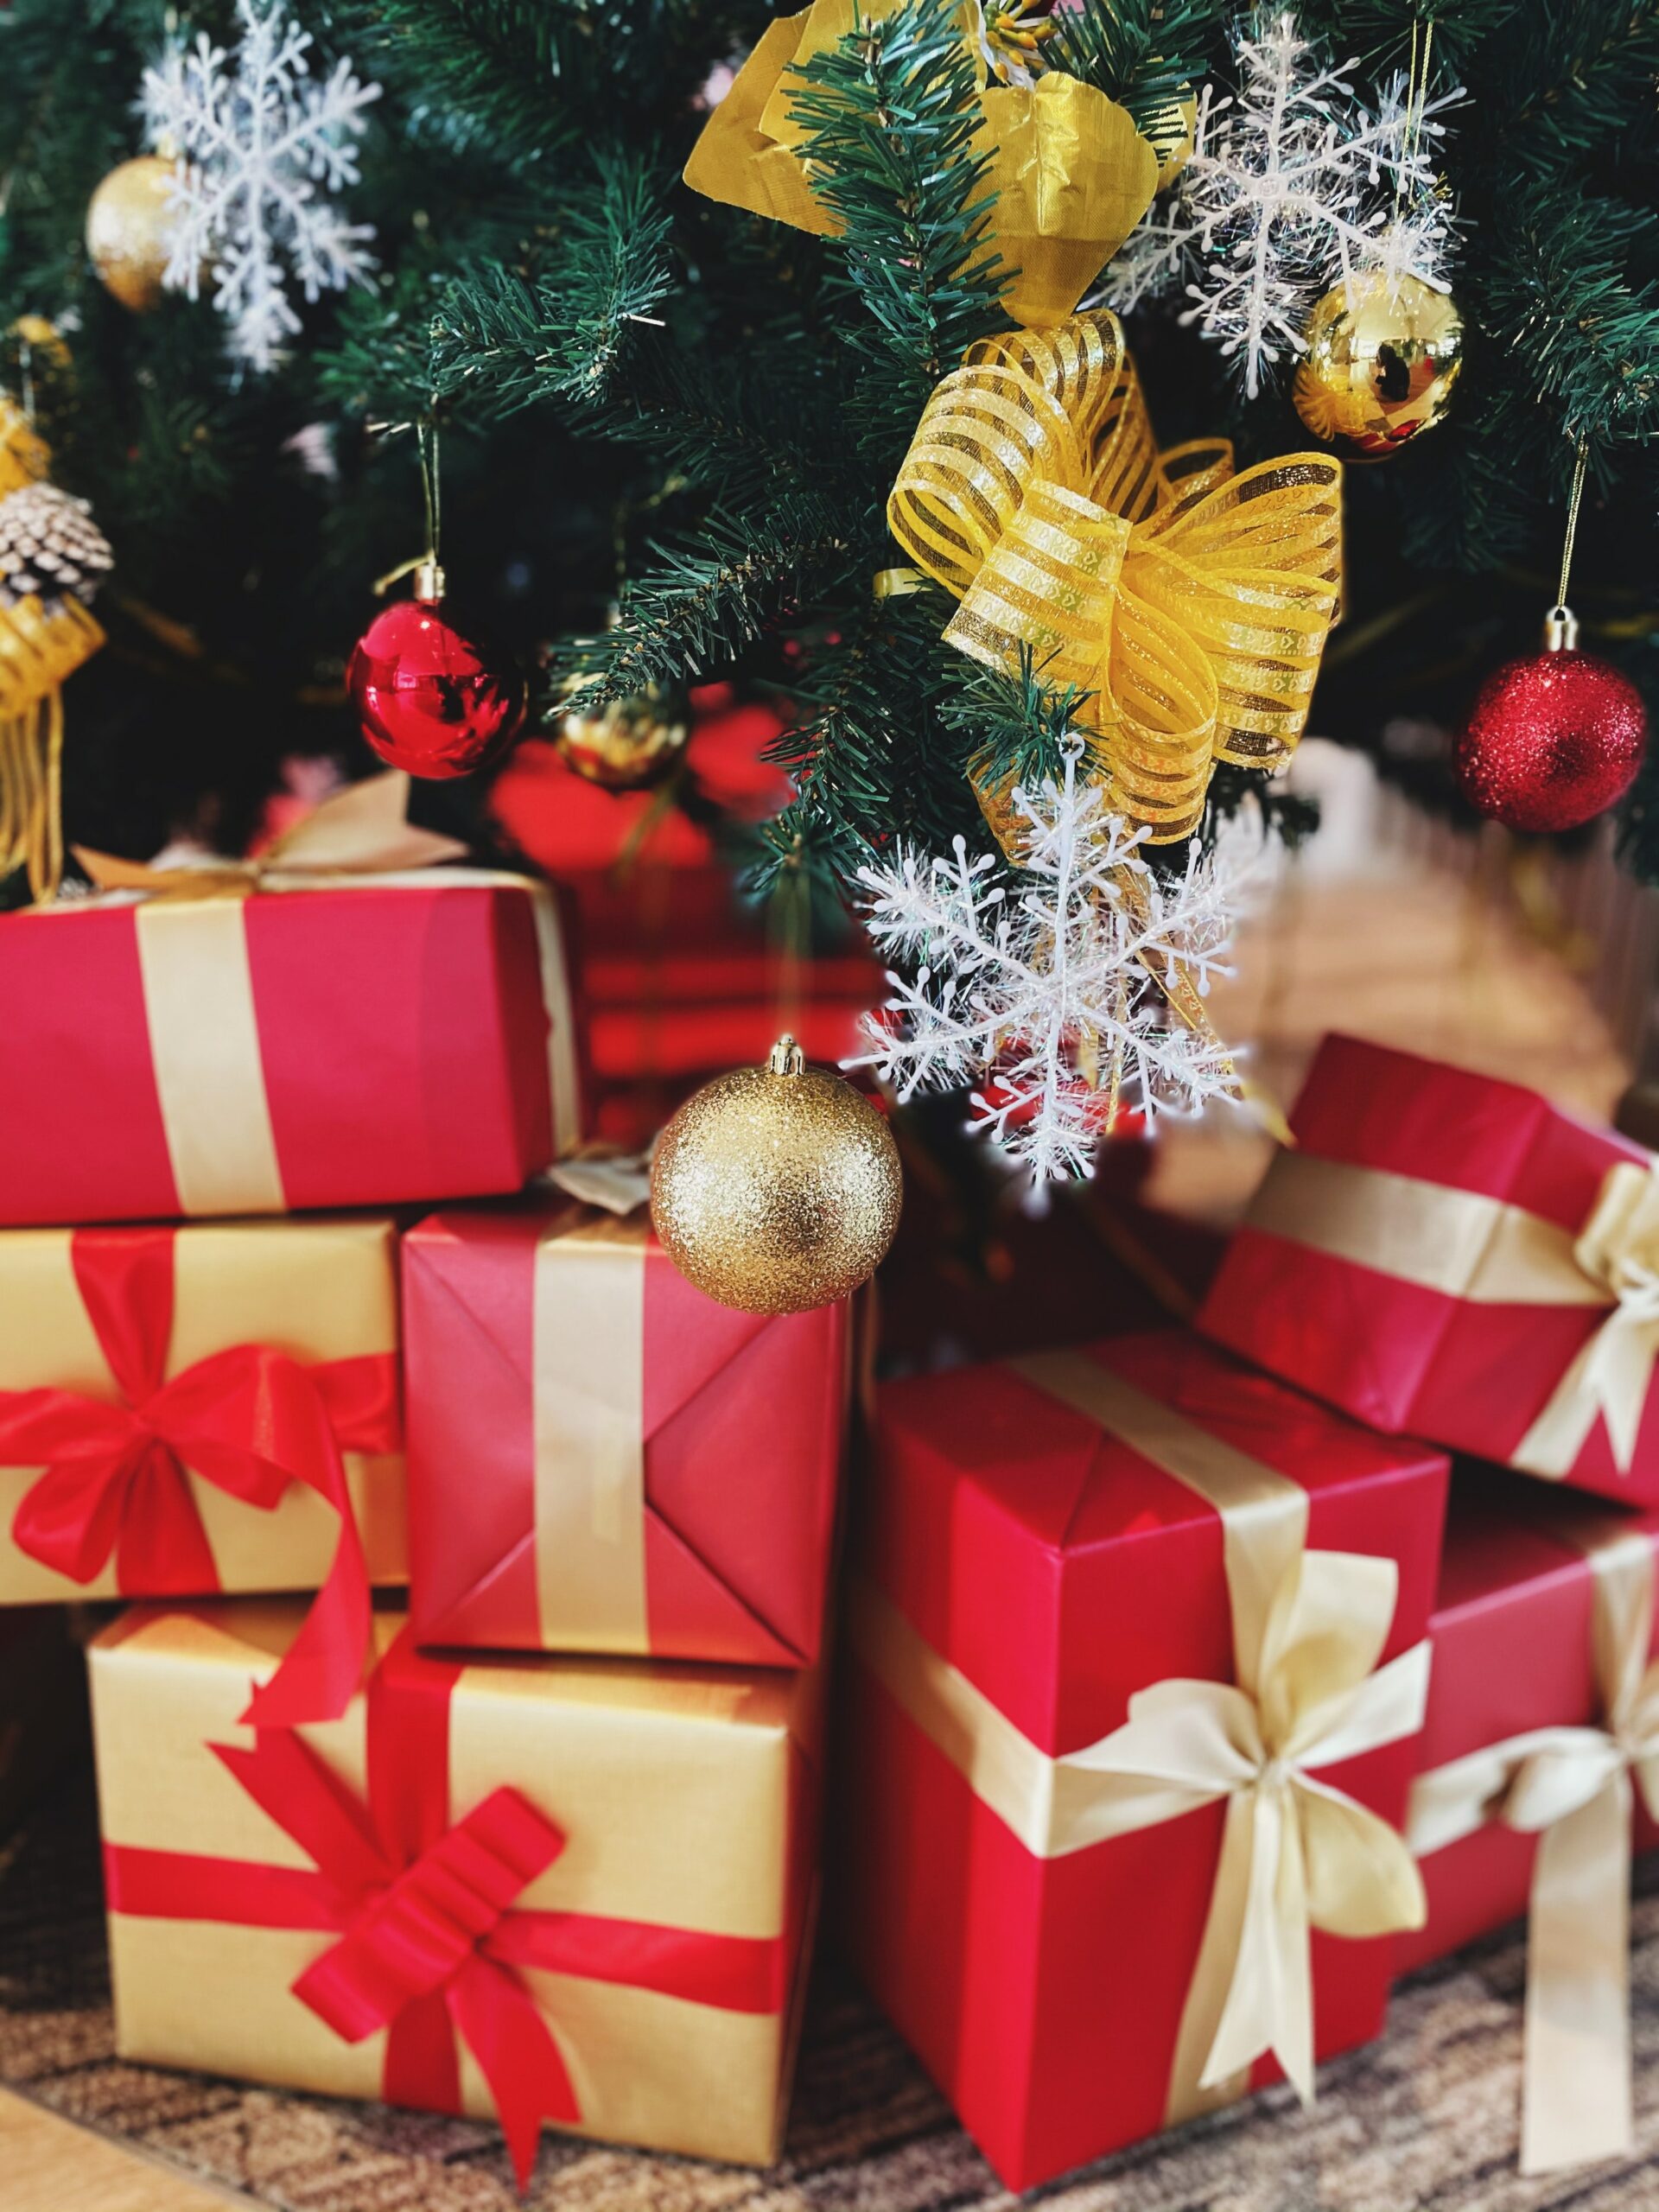 Try These 6 Tips to Make Your Christmas Gifts Sustainable